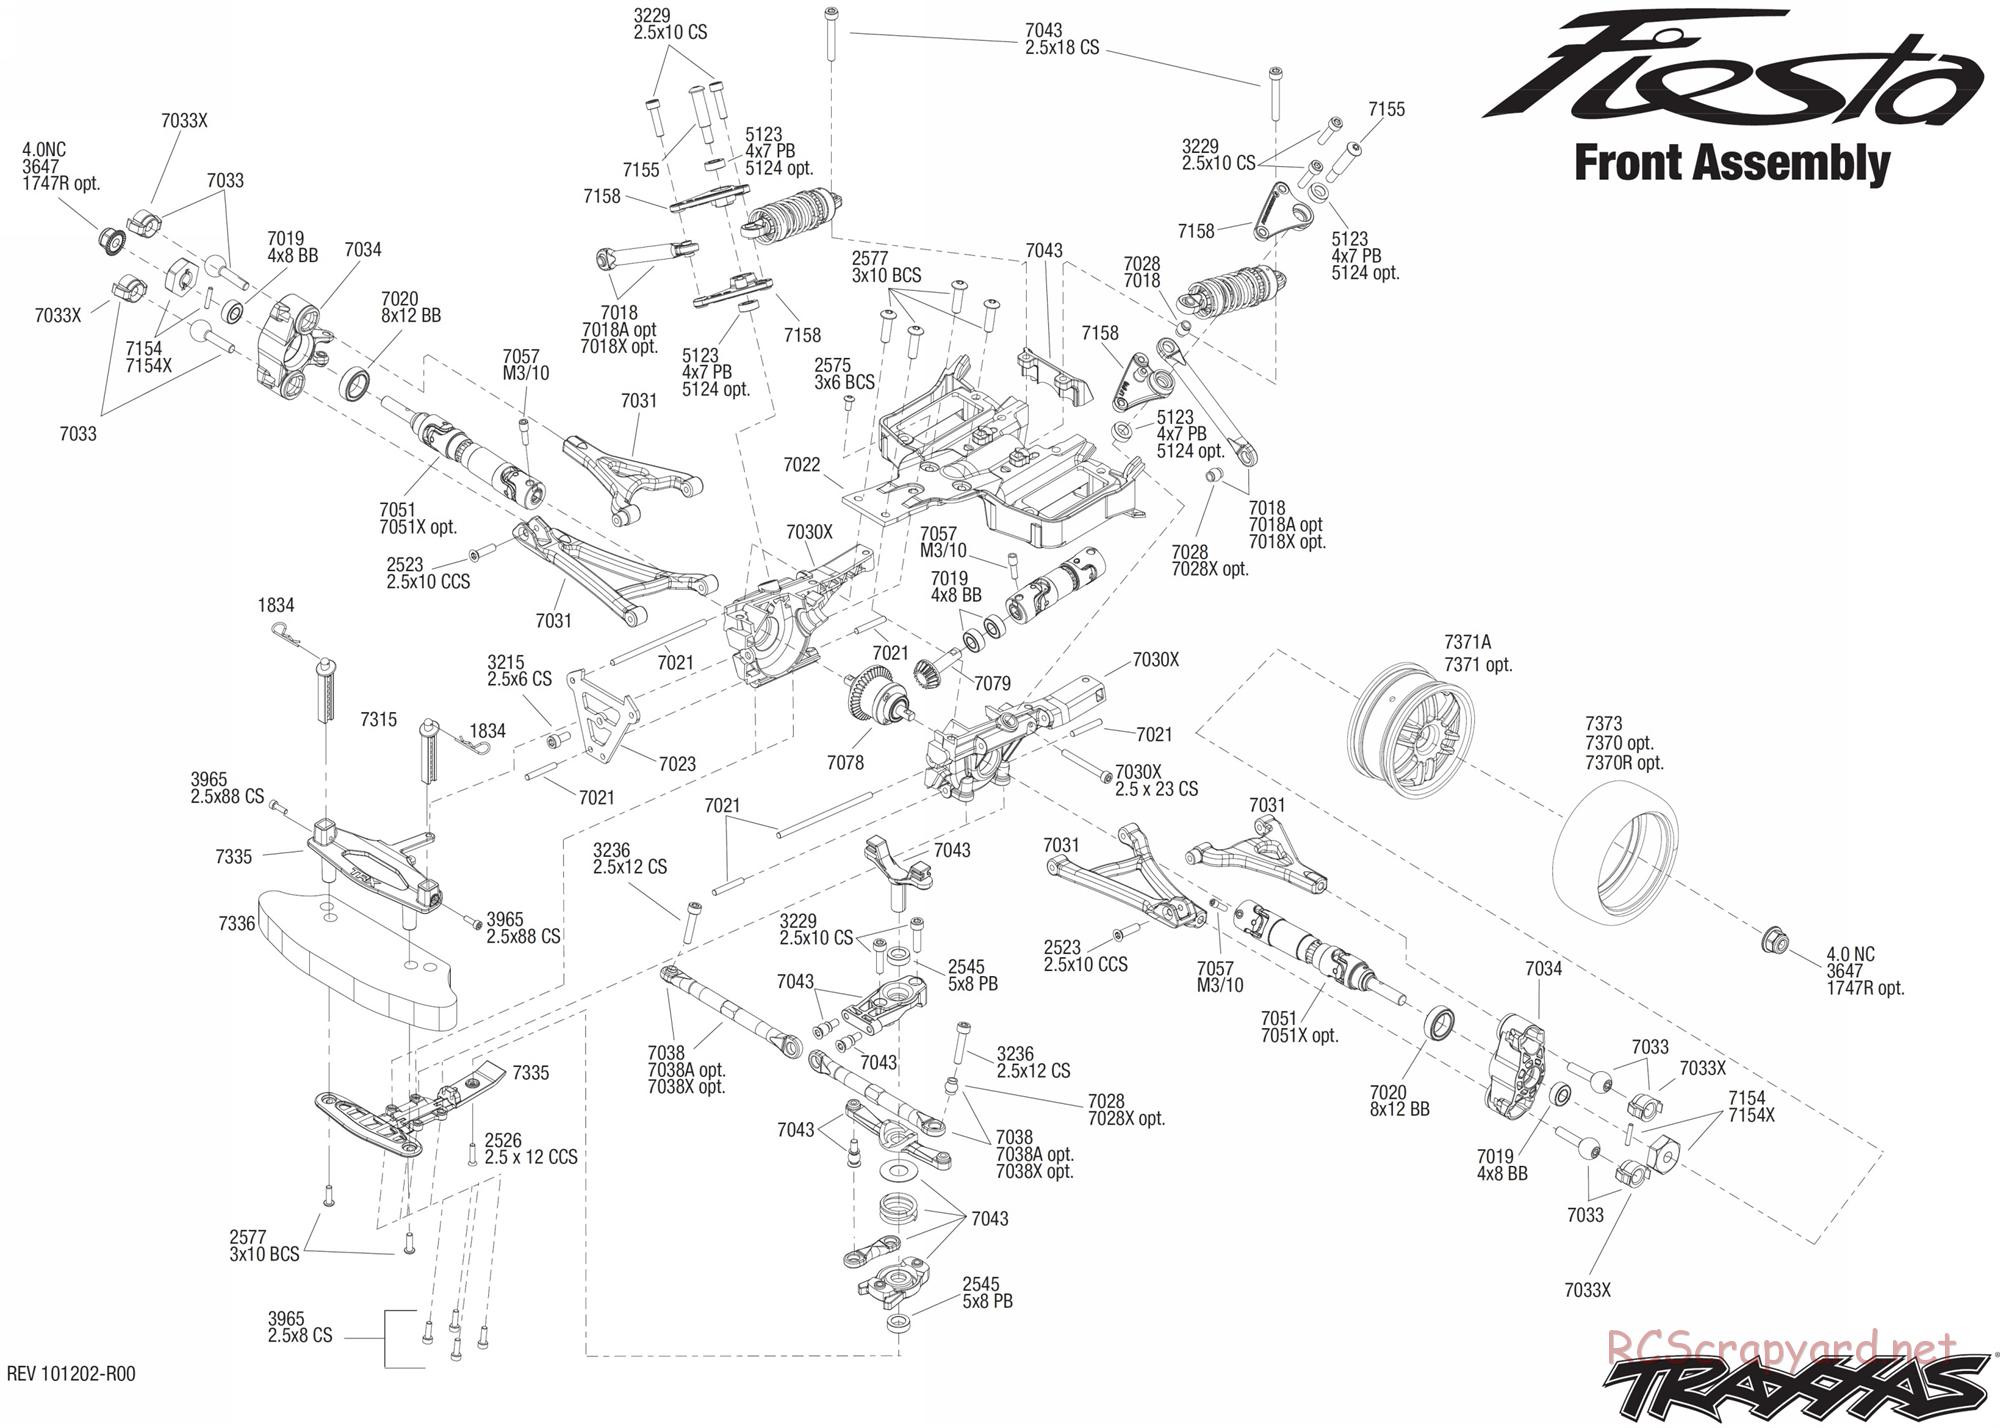 Traxxas - 1/16 Ford Fiesta (2011) - Exploded Views - Page 4